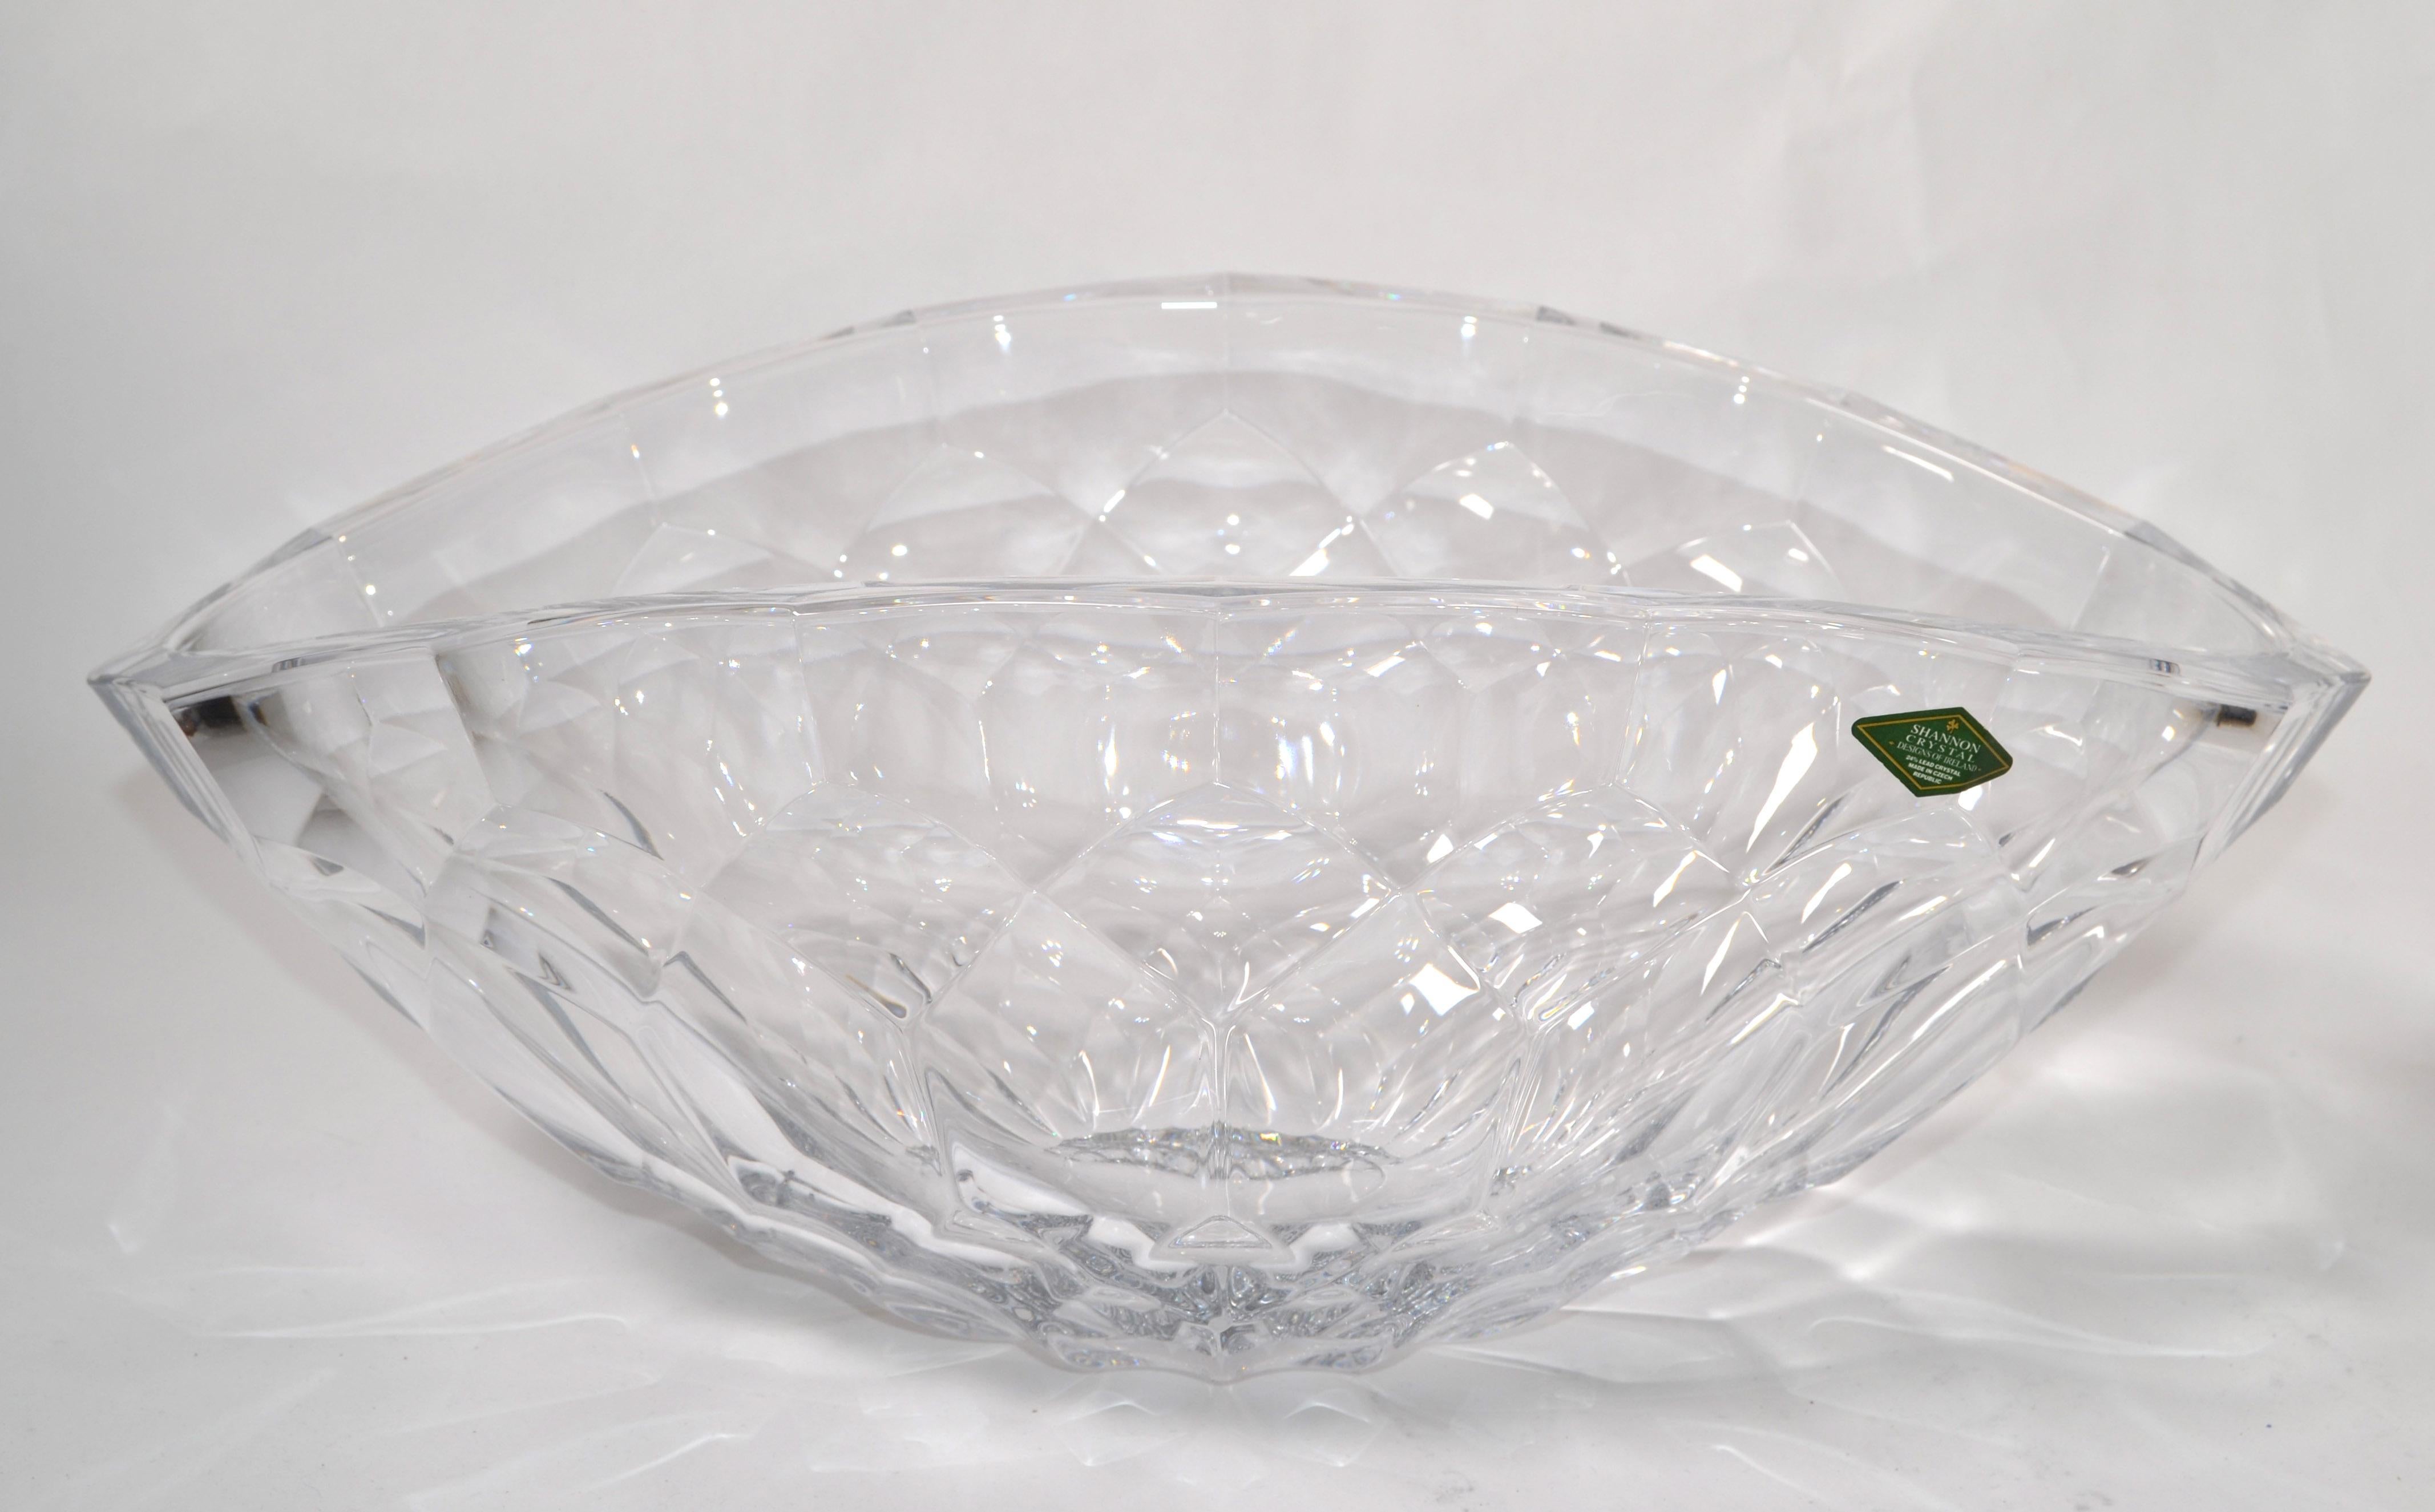 Large Shannon Crystal from the Czech Republic, very sparkly faceted but also modern and sleek and it also has a cubism feel to it.
It’s 6.38 inches tall so perfect for a Fruit Bowl or Centerpiece.
Lovely piece works for Mid-Century Modern decor